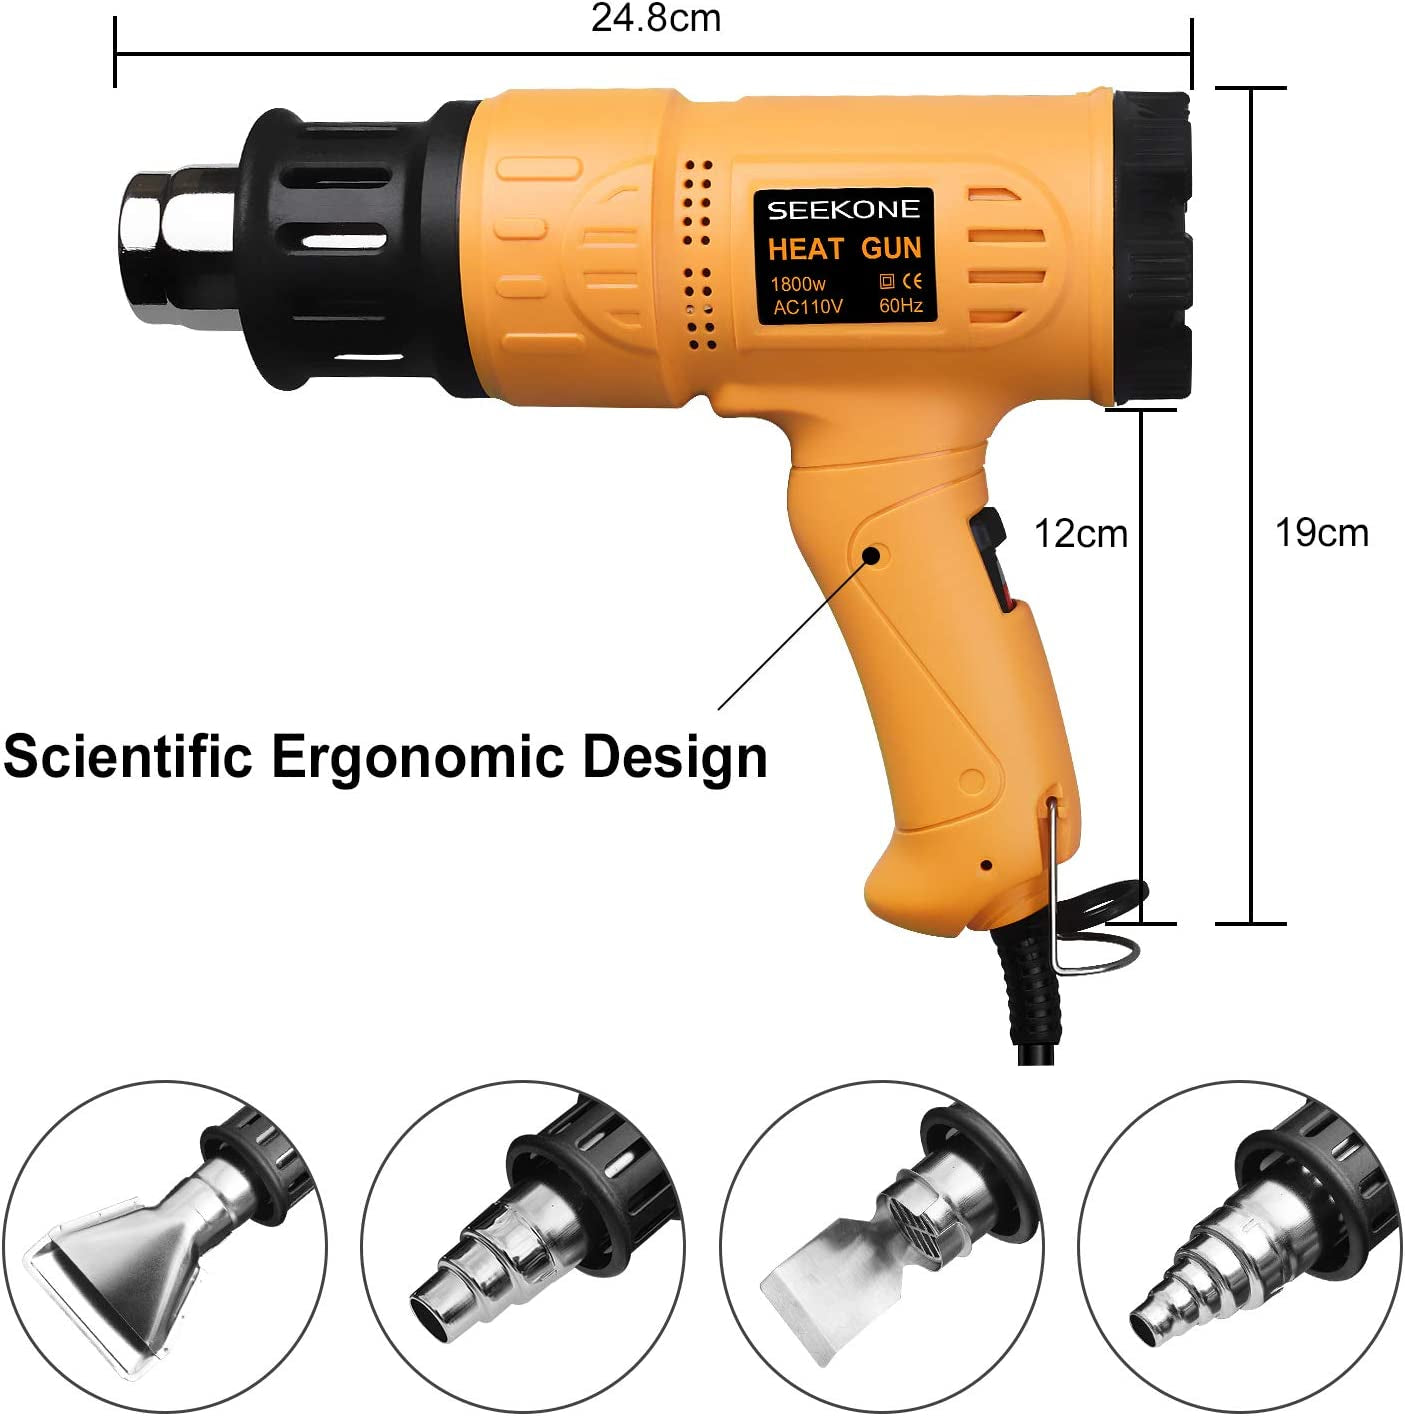 Heat Gun,  2000W Professional Hot Air Gun 50℃- 600℃ Variable Temperature Control with 2-Temp Settings, Overload Protection, Double Heating Wire Fast Heating, 7 Accessories for Shrinking PVC